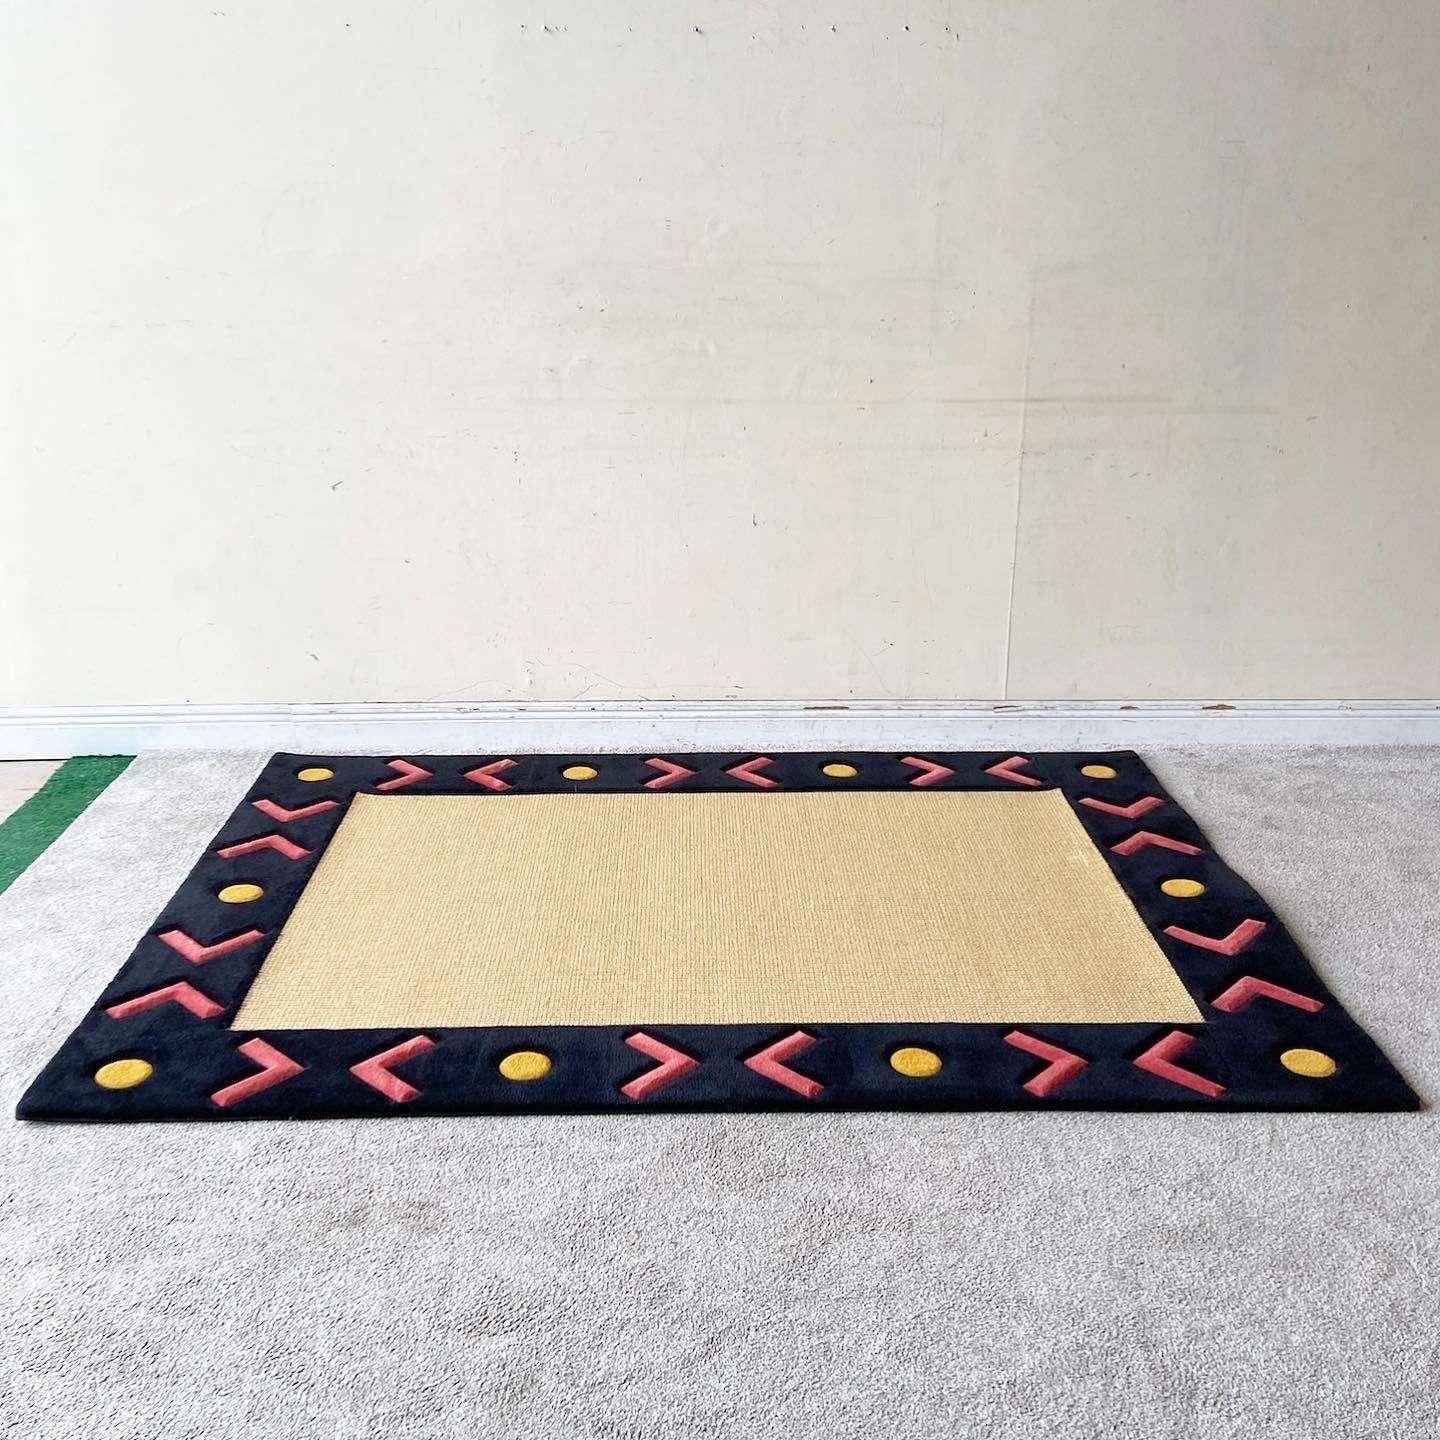 Amazing vintage Boho Chic meats southwestern meats Memphis style rectangular area rug. Features a natural fiber, jute-like, center bordered by a black edge with red arrows and yellow circles throughout.

Rug 5
